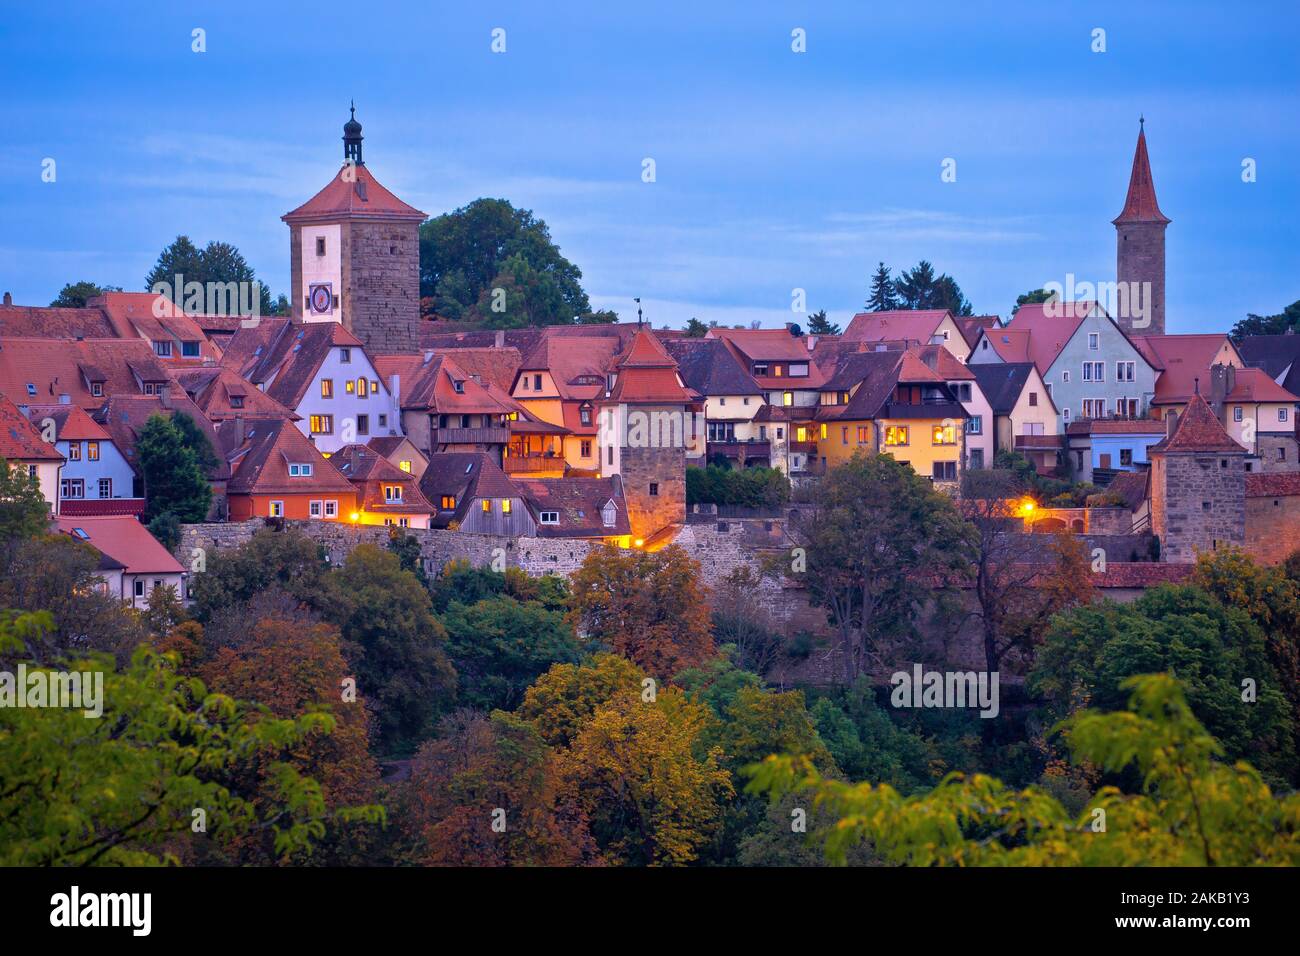 Rothenburg ob der Tauber. Historic town of Rothenburg ob der Tauber evening landmarks view, Romantic road of Bavaria region of Germany Stock Photo